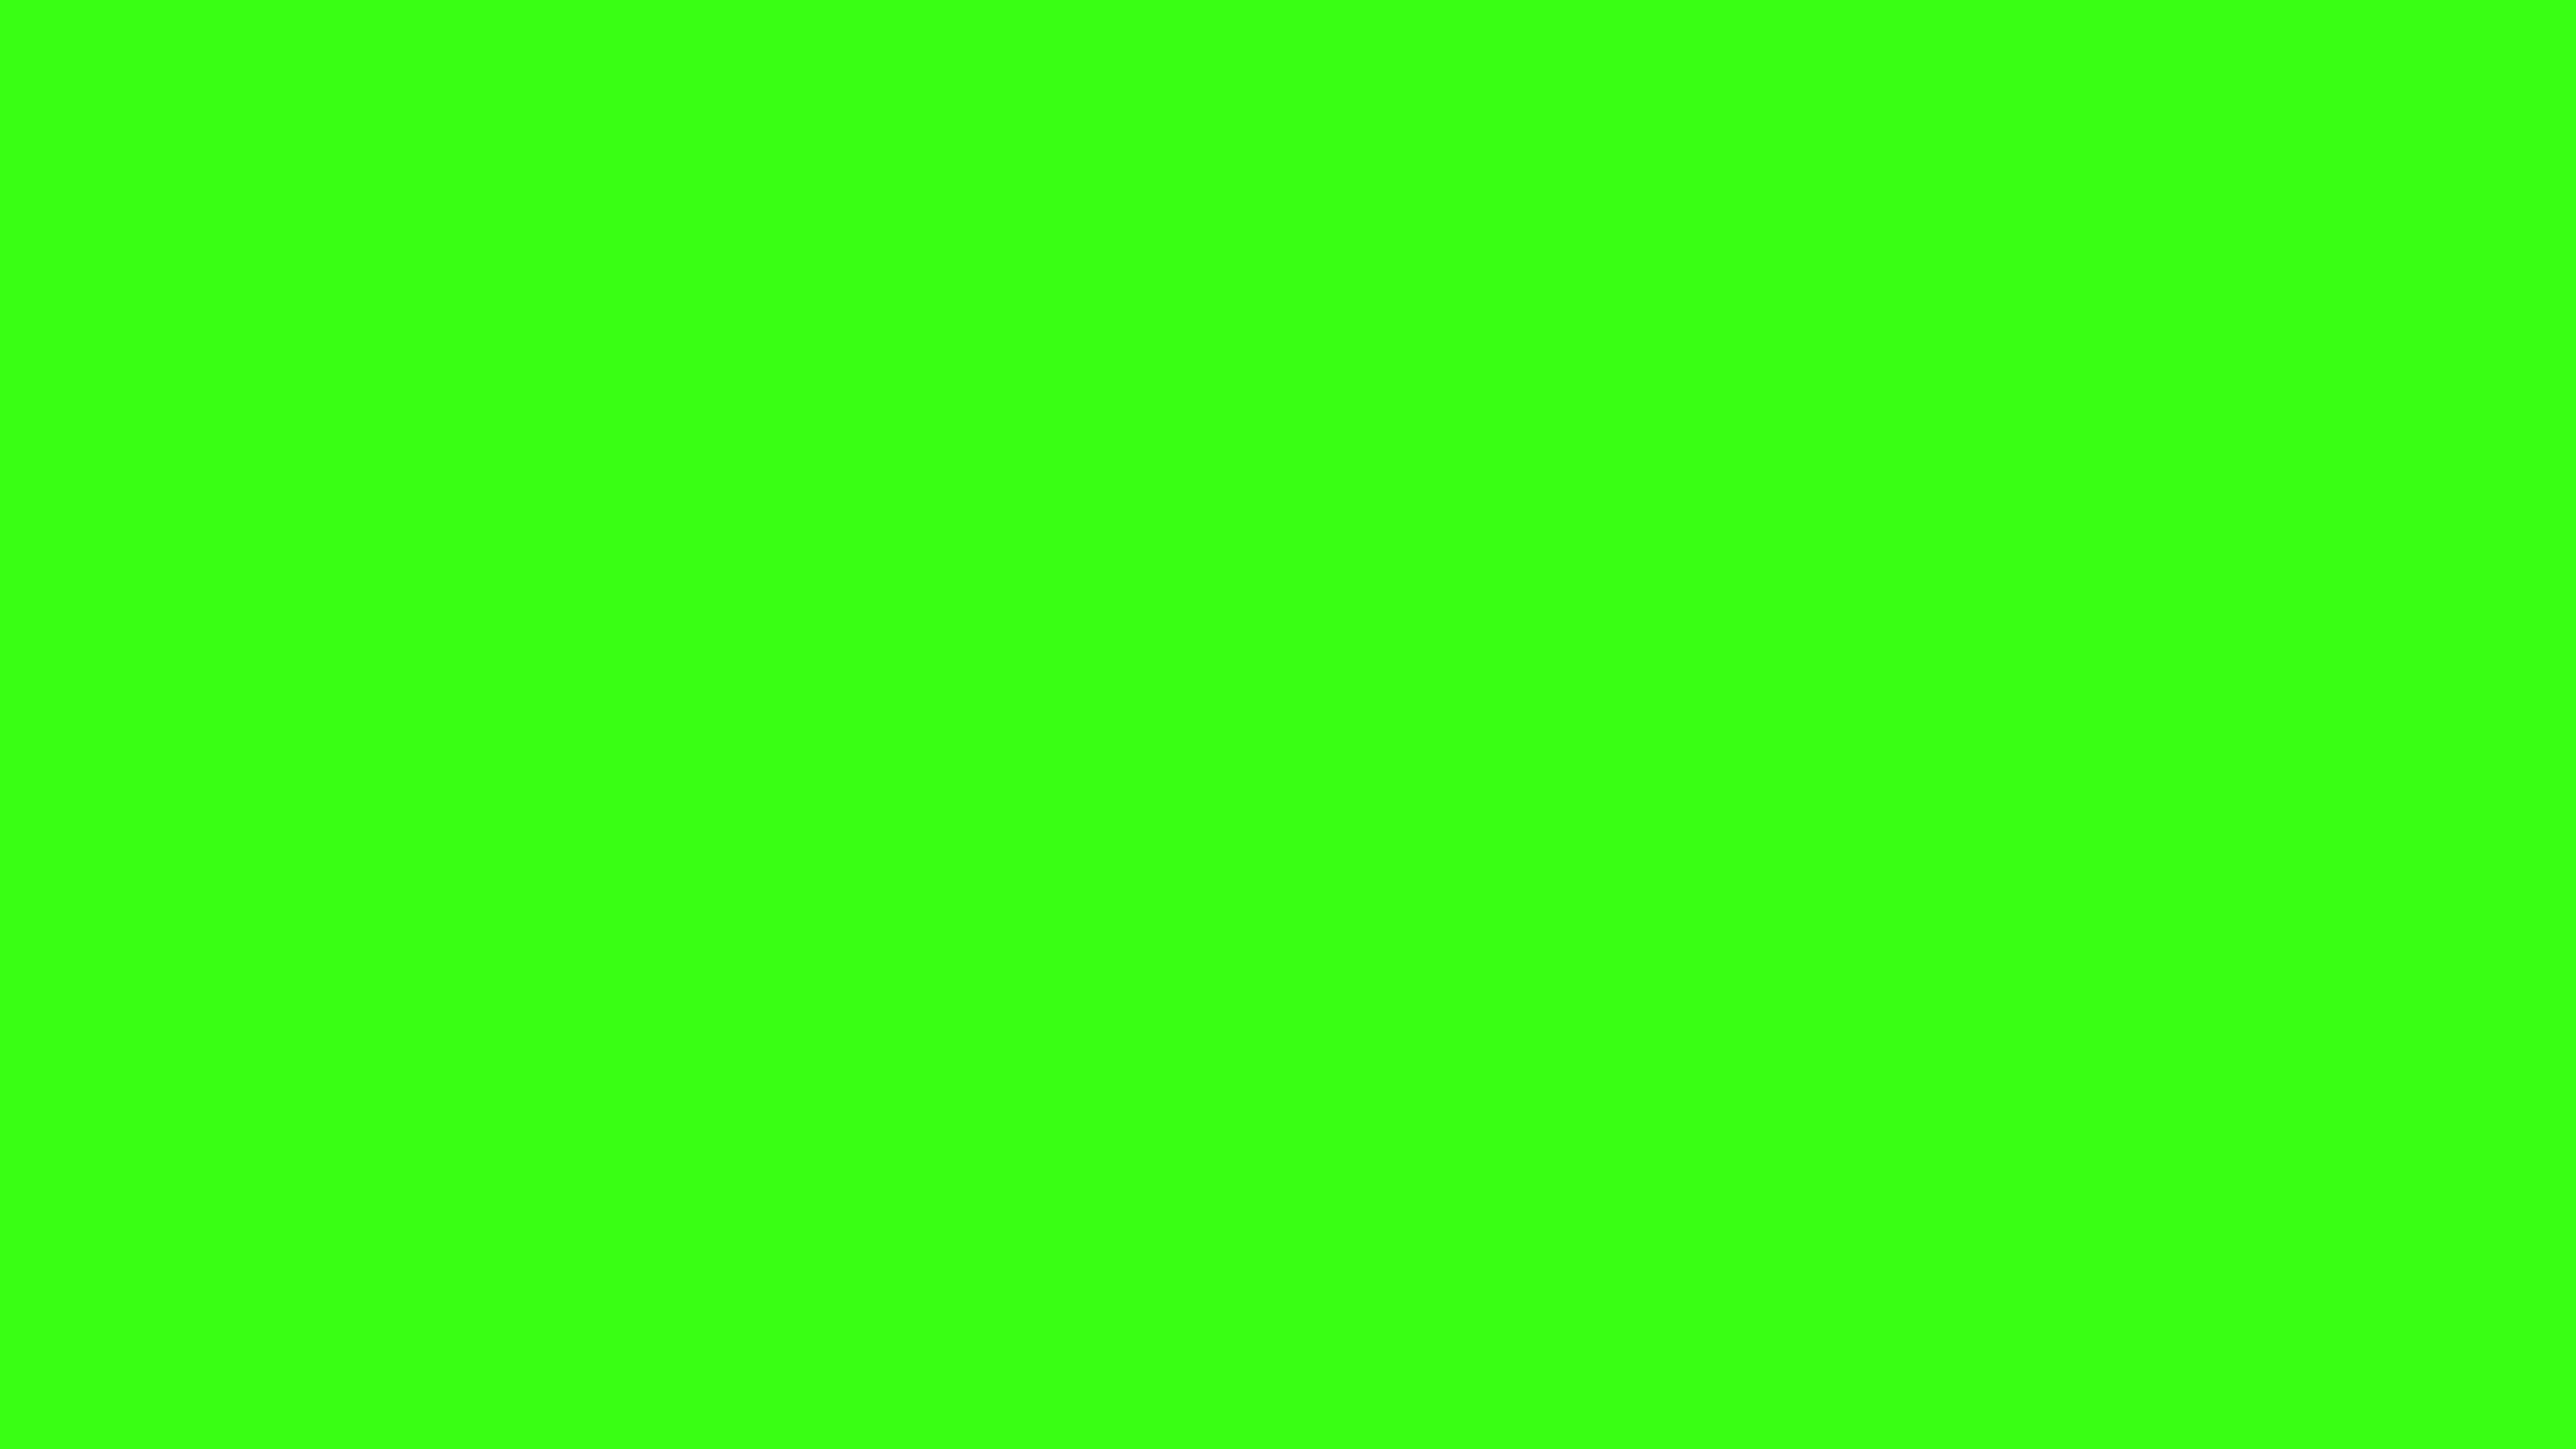 Neon Green Solid Color Background Image | Free Image Generator